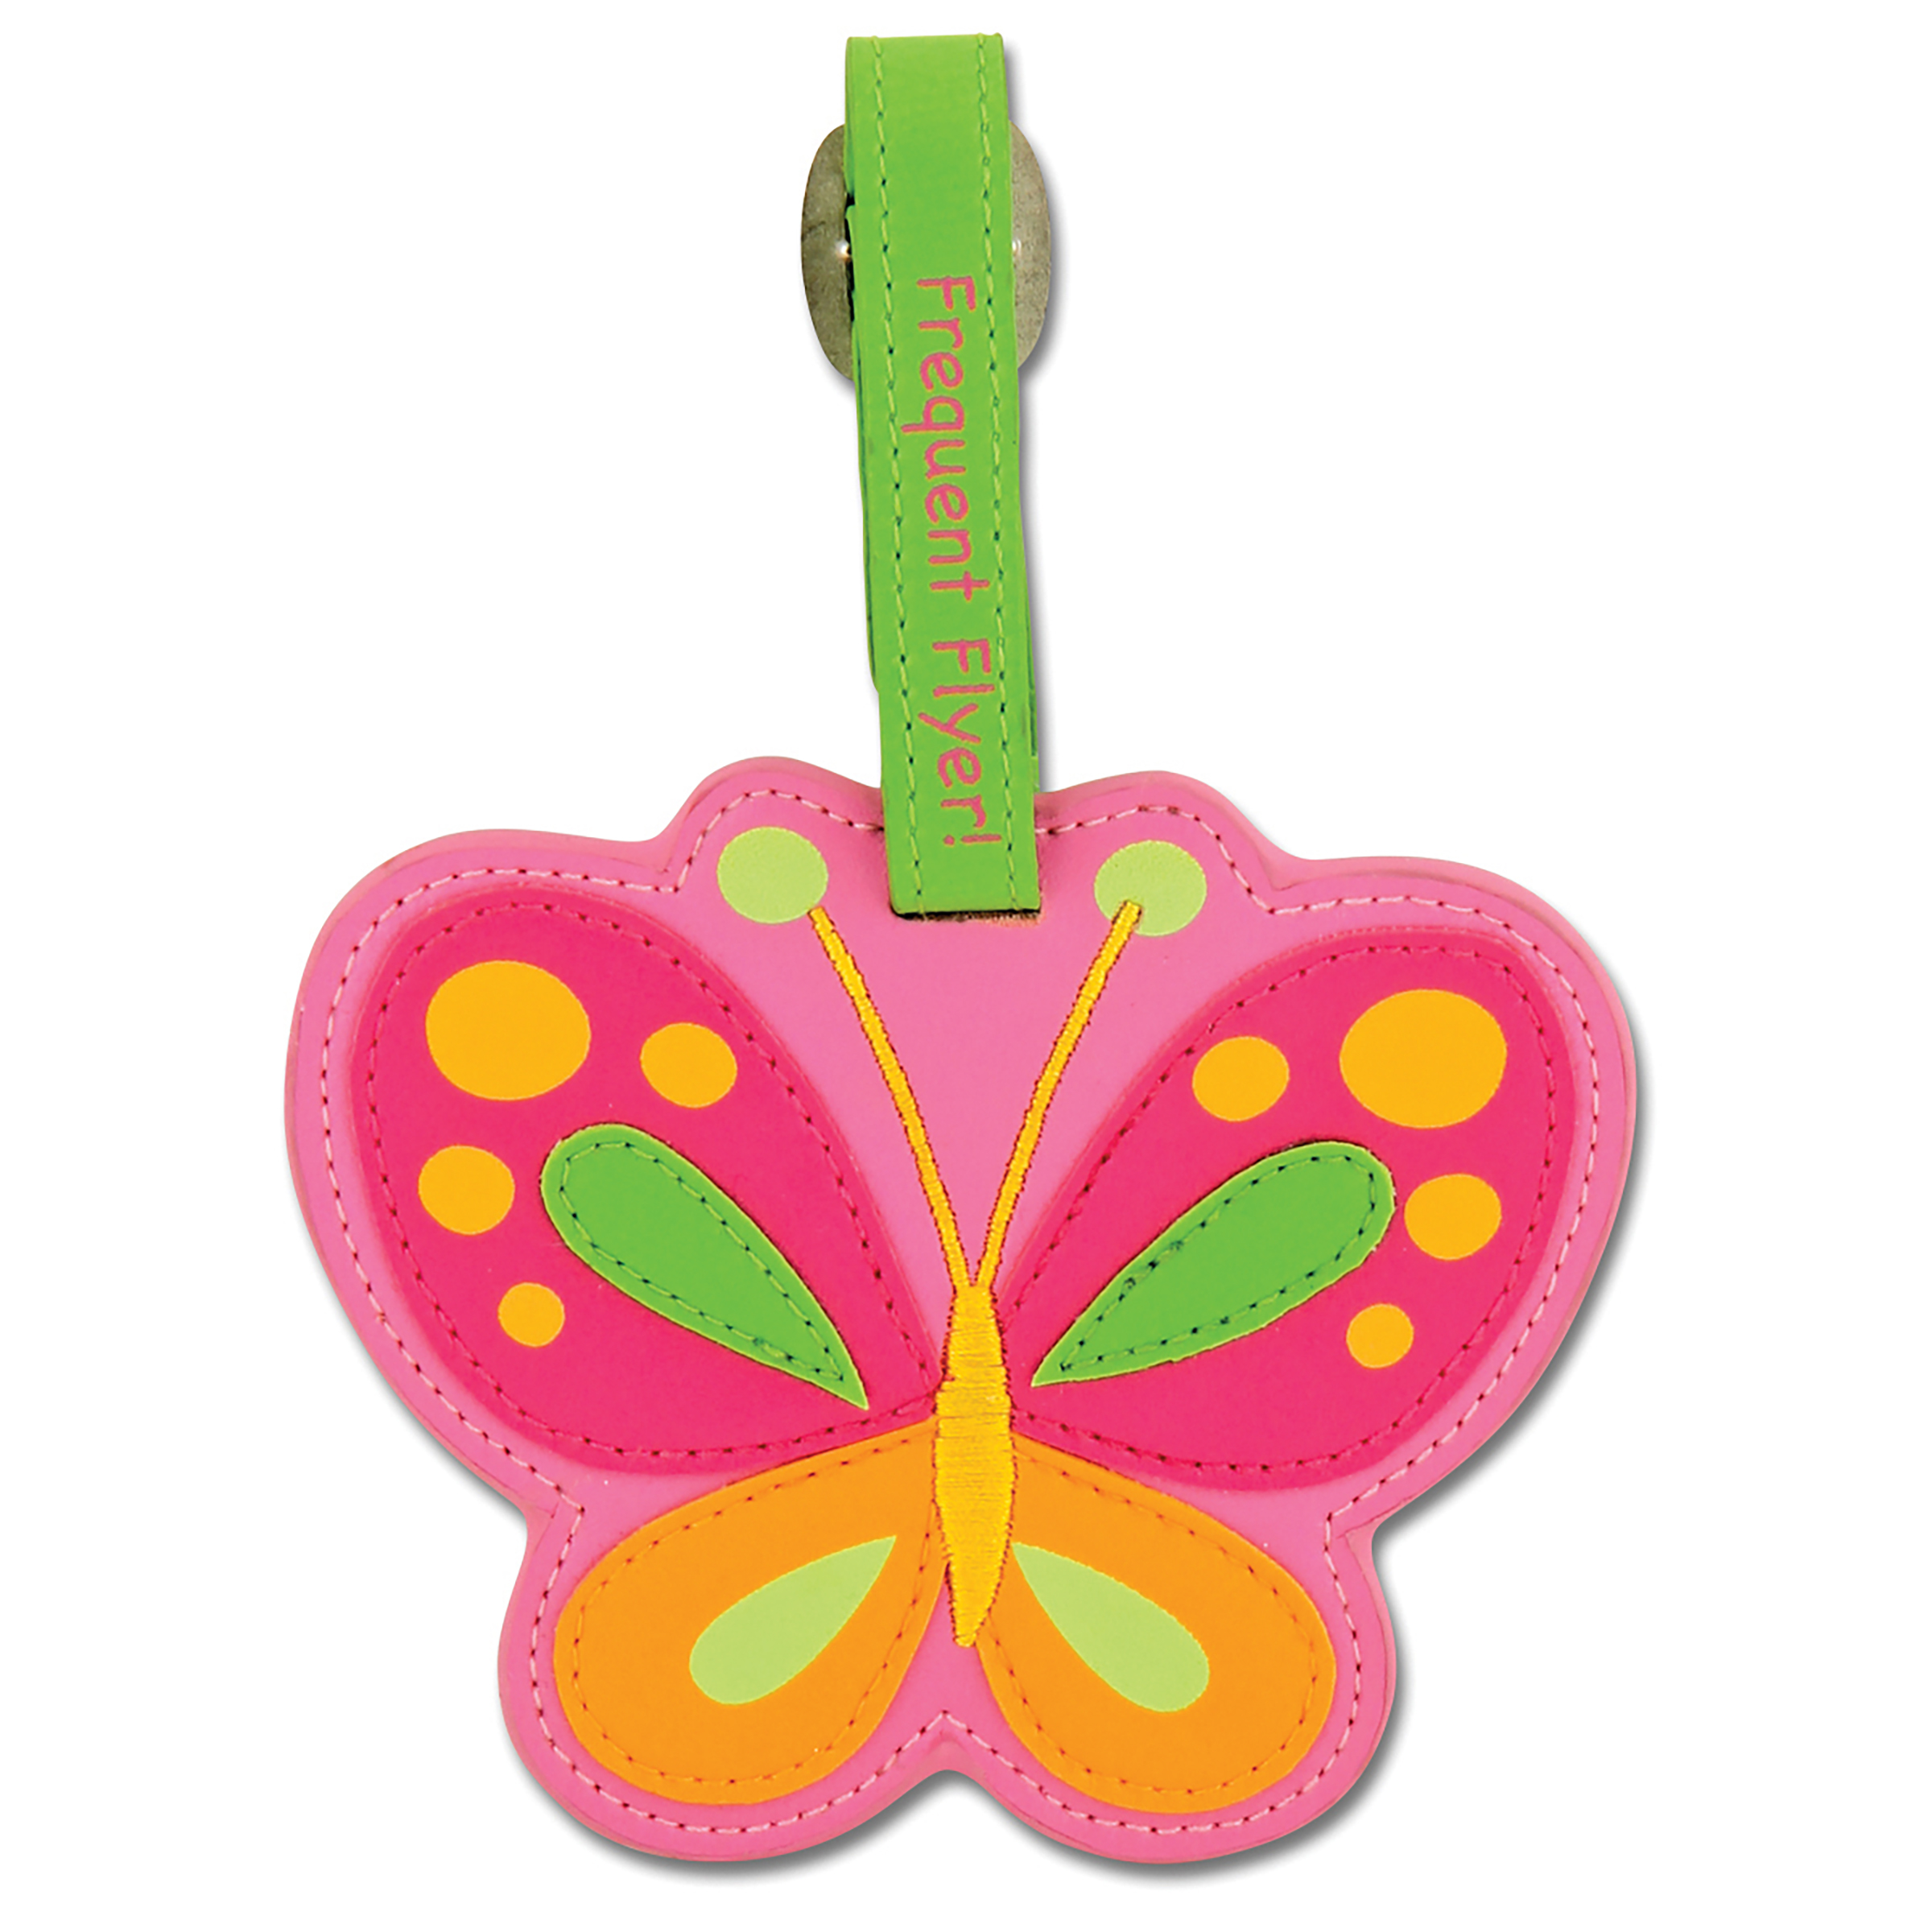 Stephen Joseph Luggage Tag - Butterfly - image 1 of 6